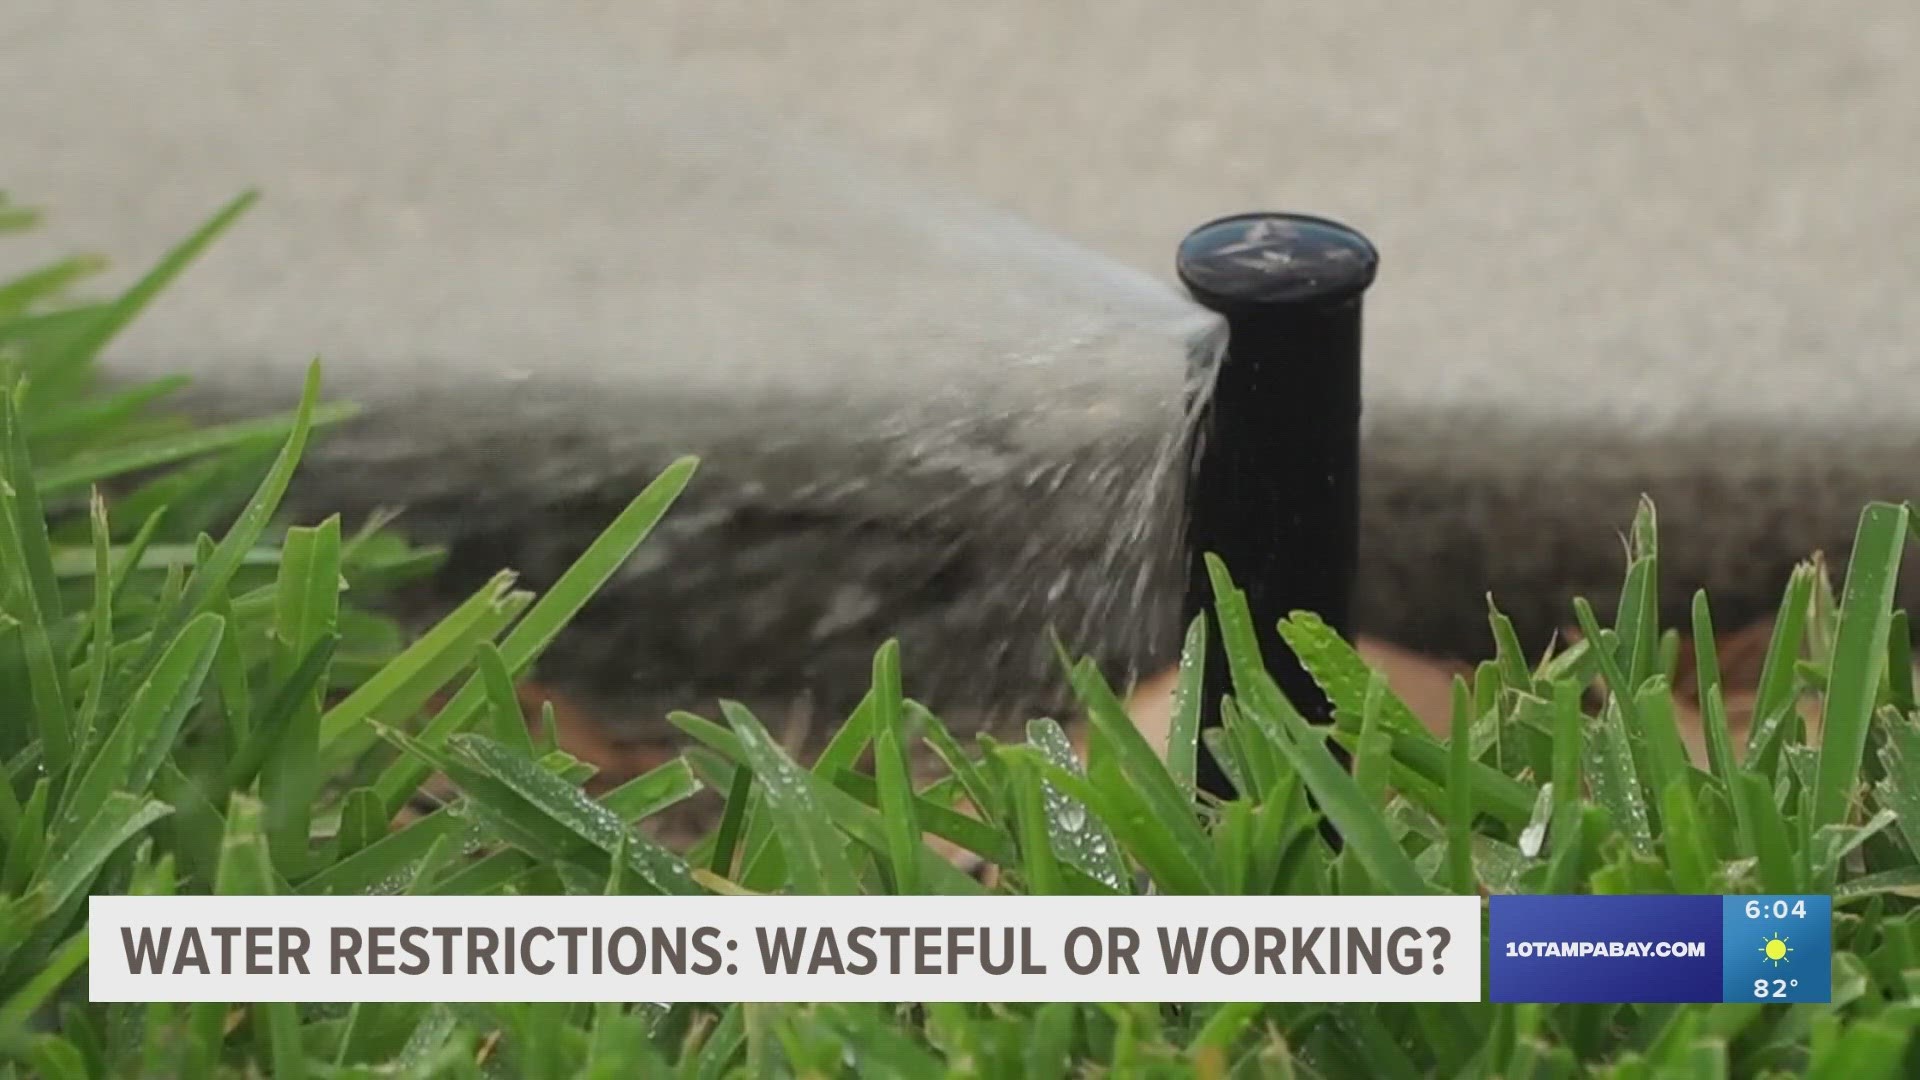 Since December 2023, lawn watering has been restricted to once a week to conserve water amid drought conditions.